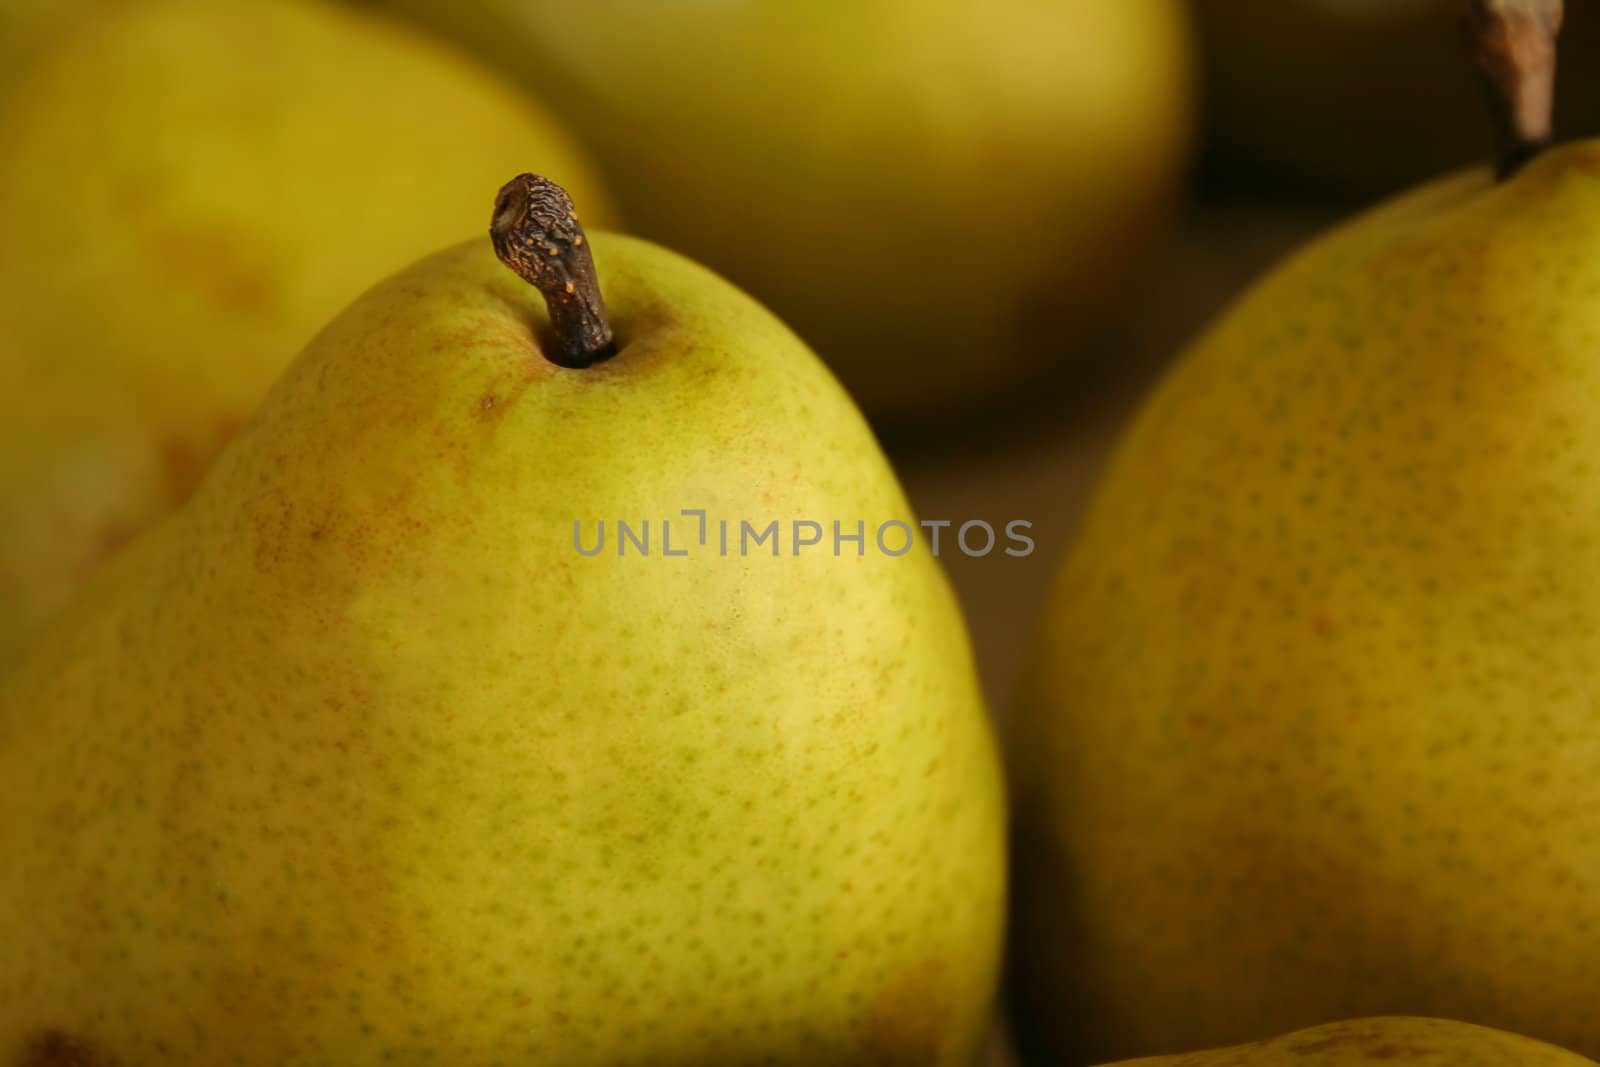 Pears by thephotoguy